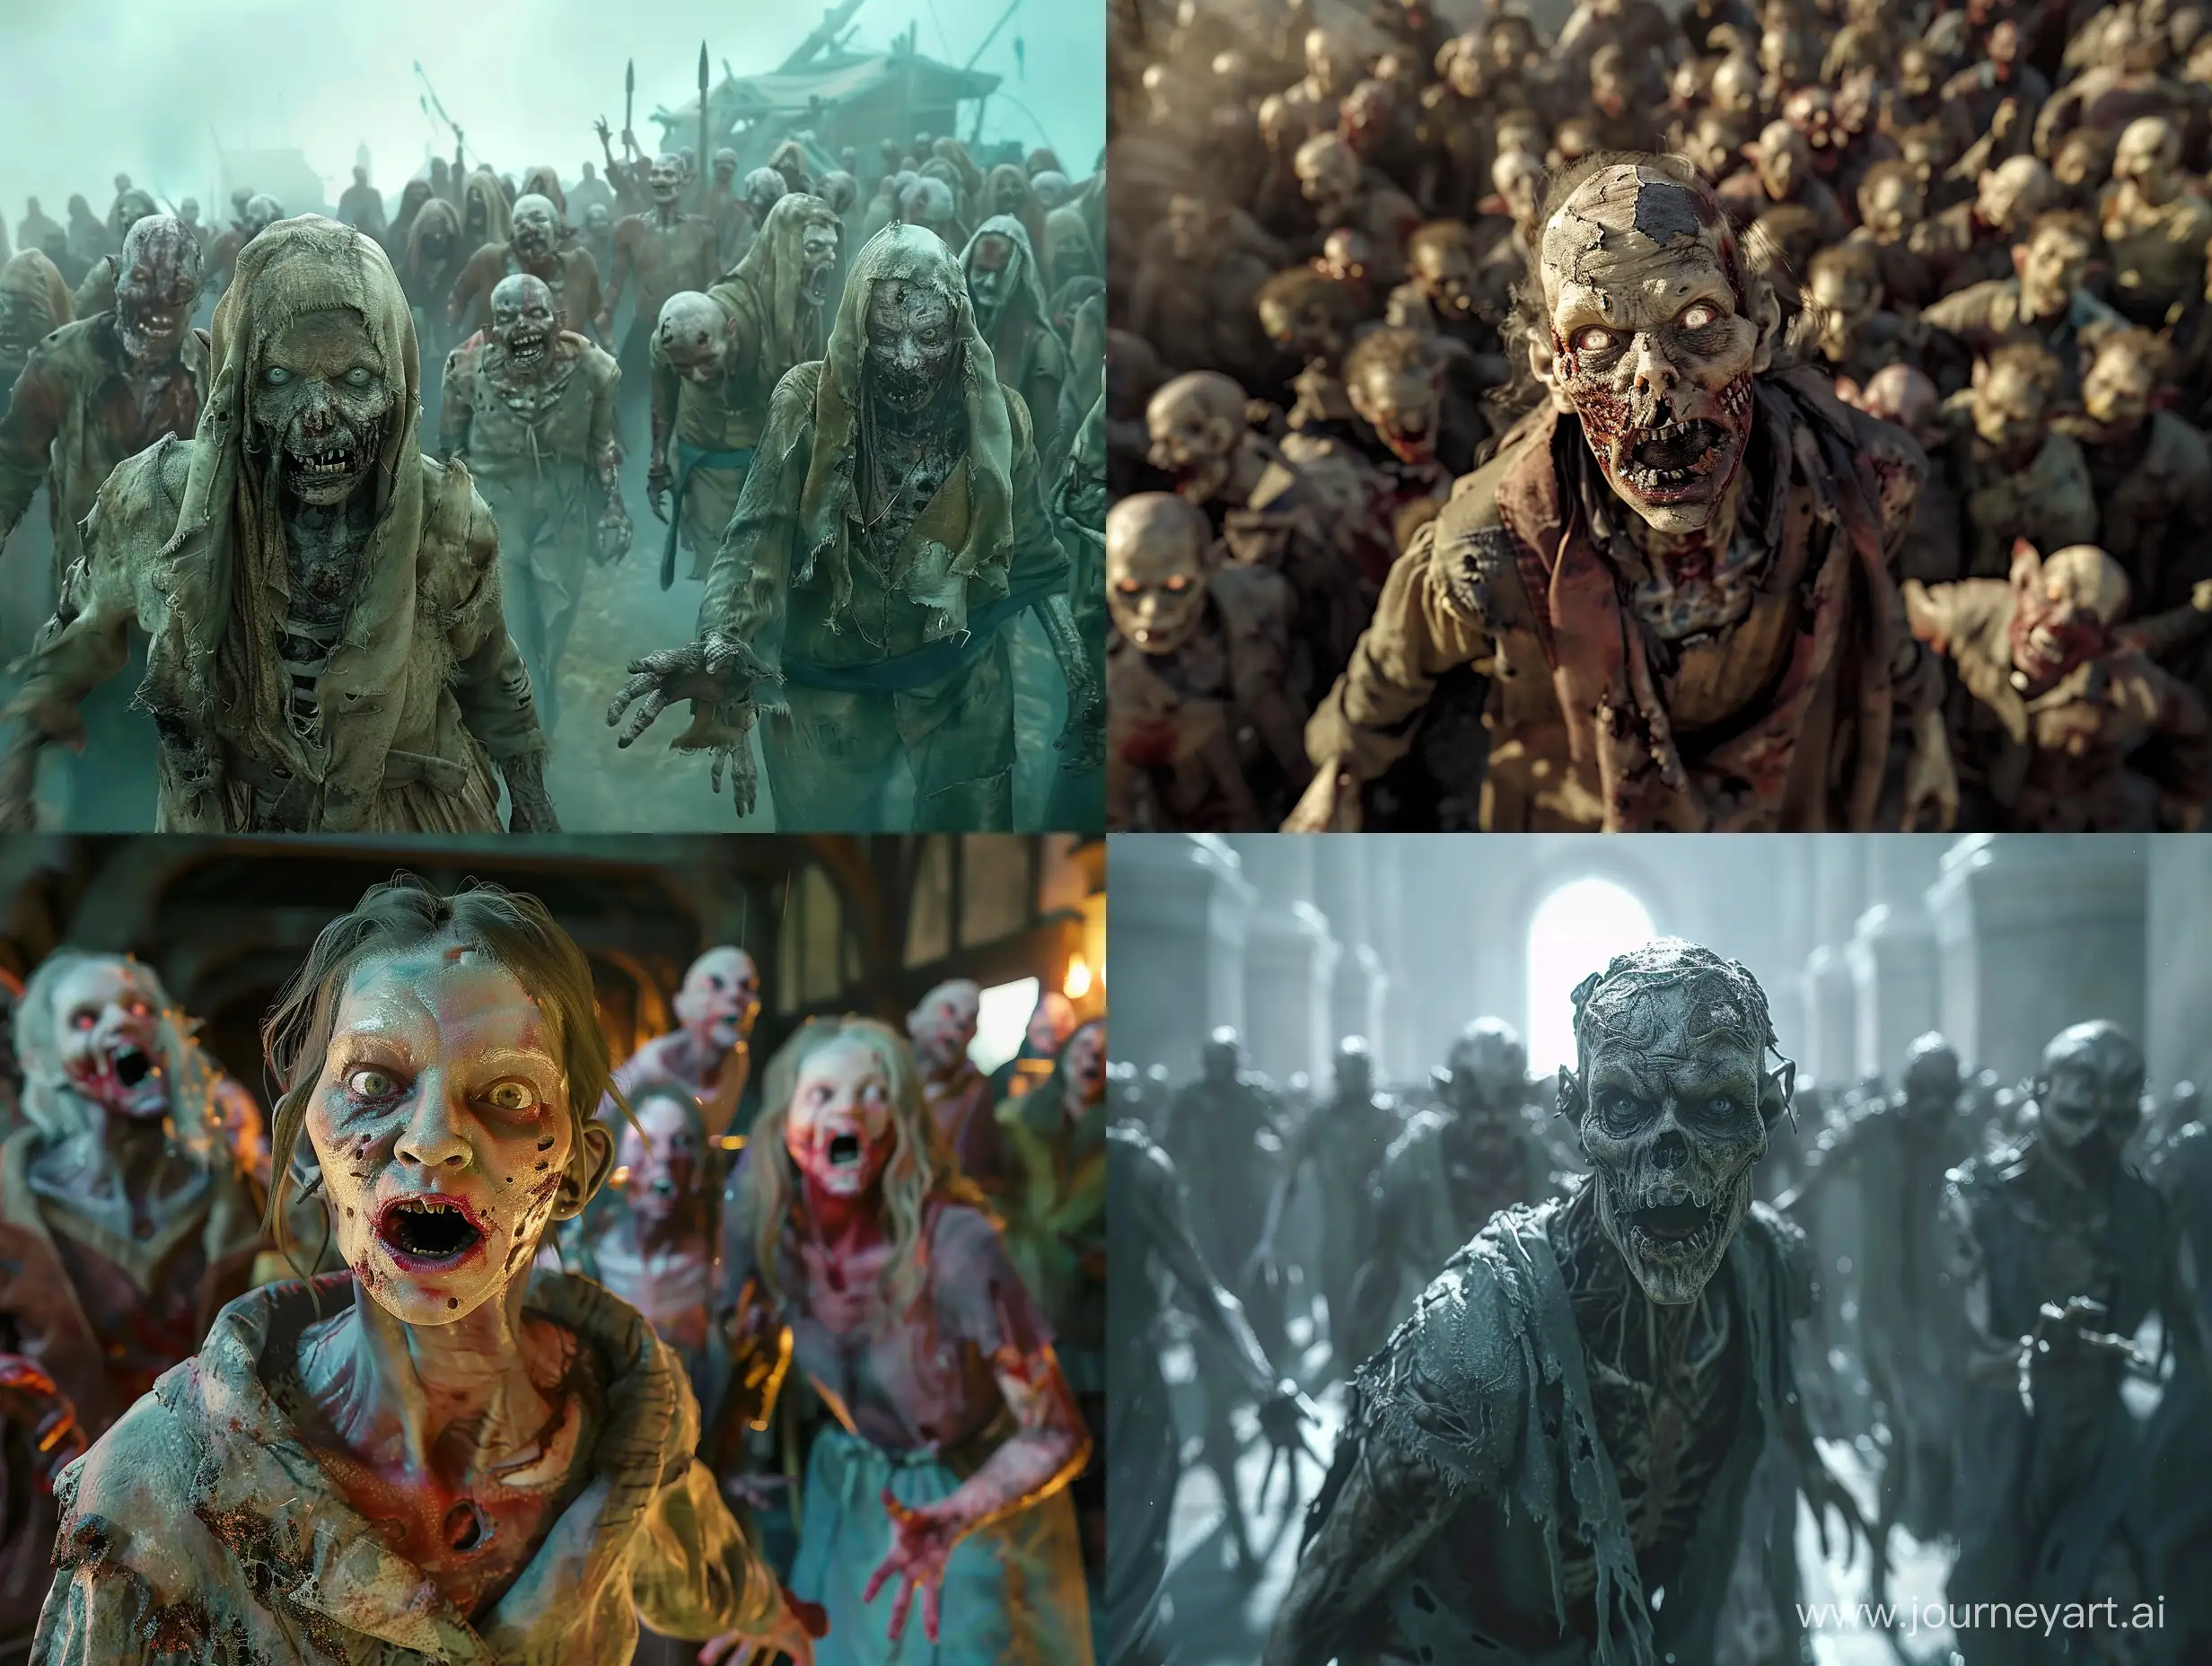 Epic-Battle-Wizards-Confronting-Overwhelming-Zombie-Horde-in-Cinematic-Photorealistic-Scene